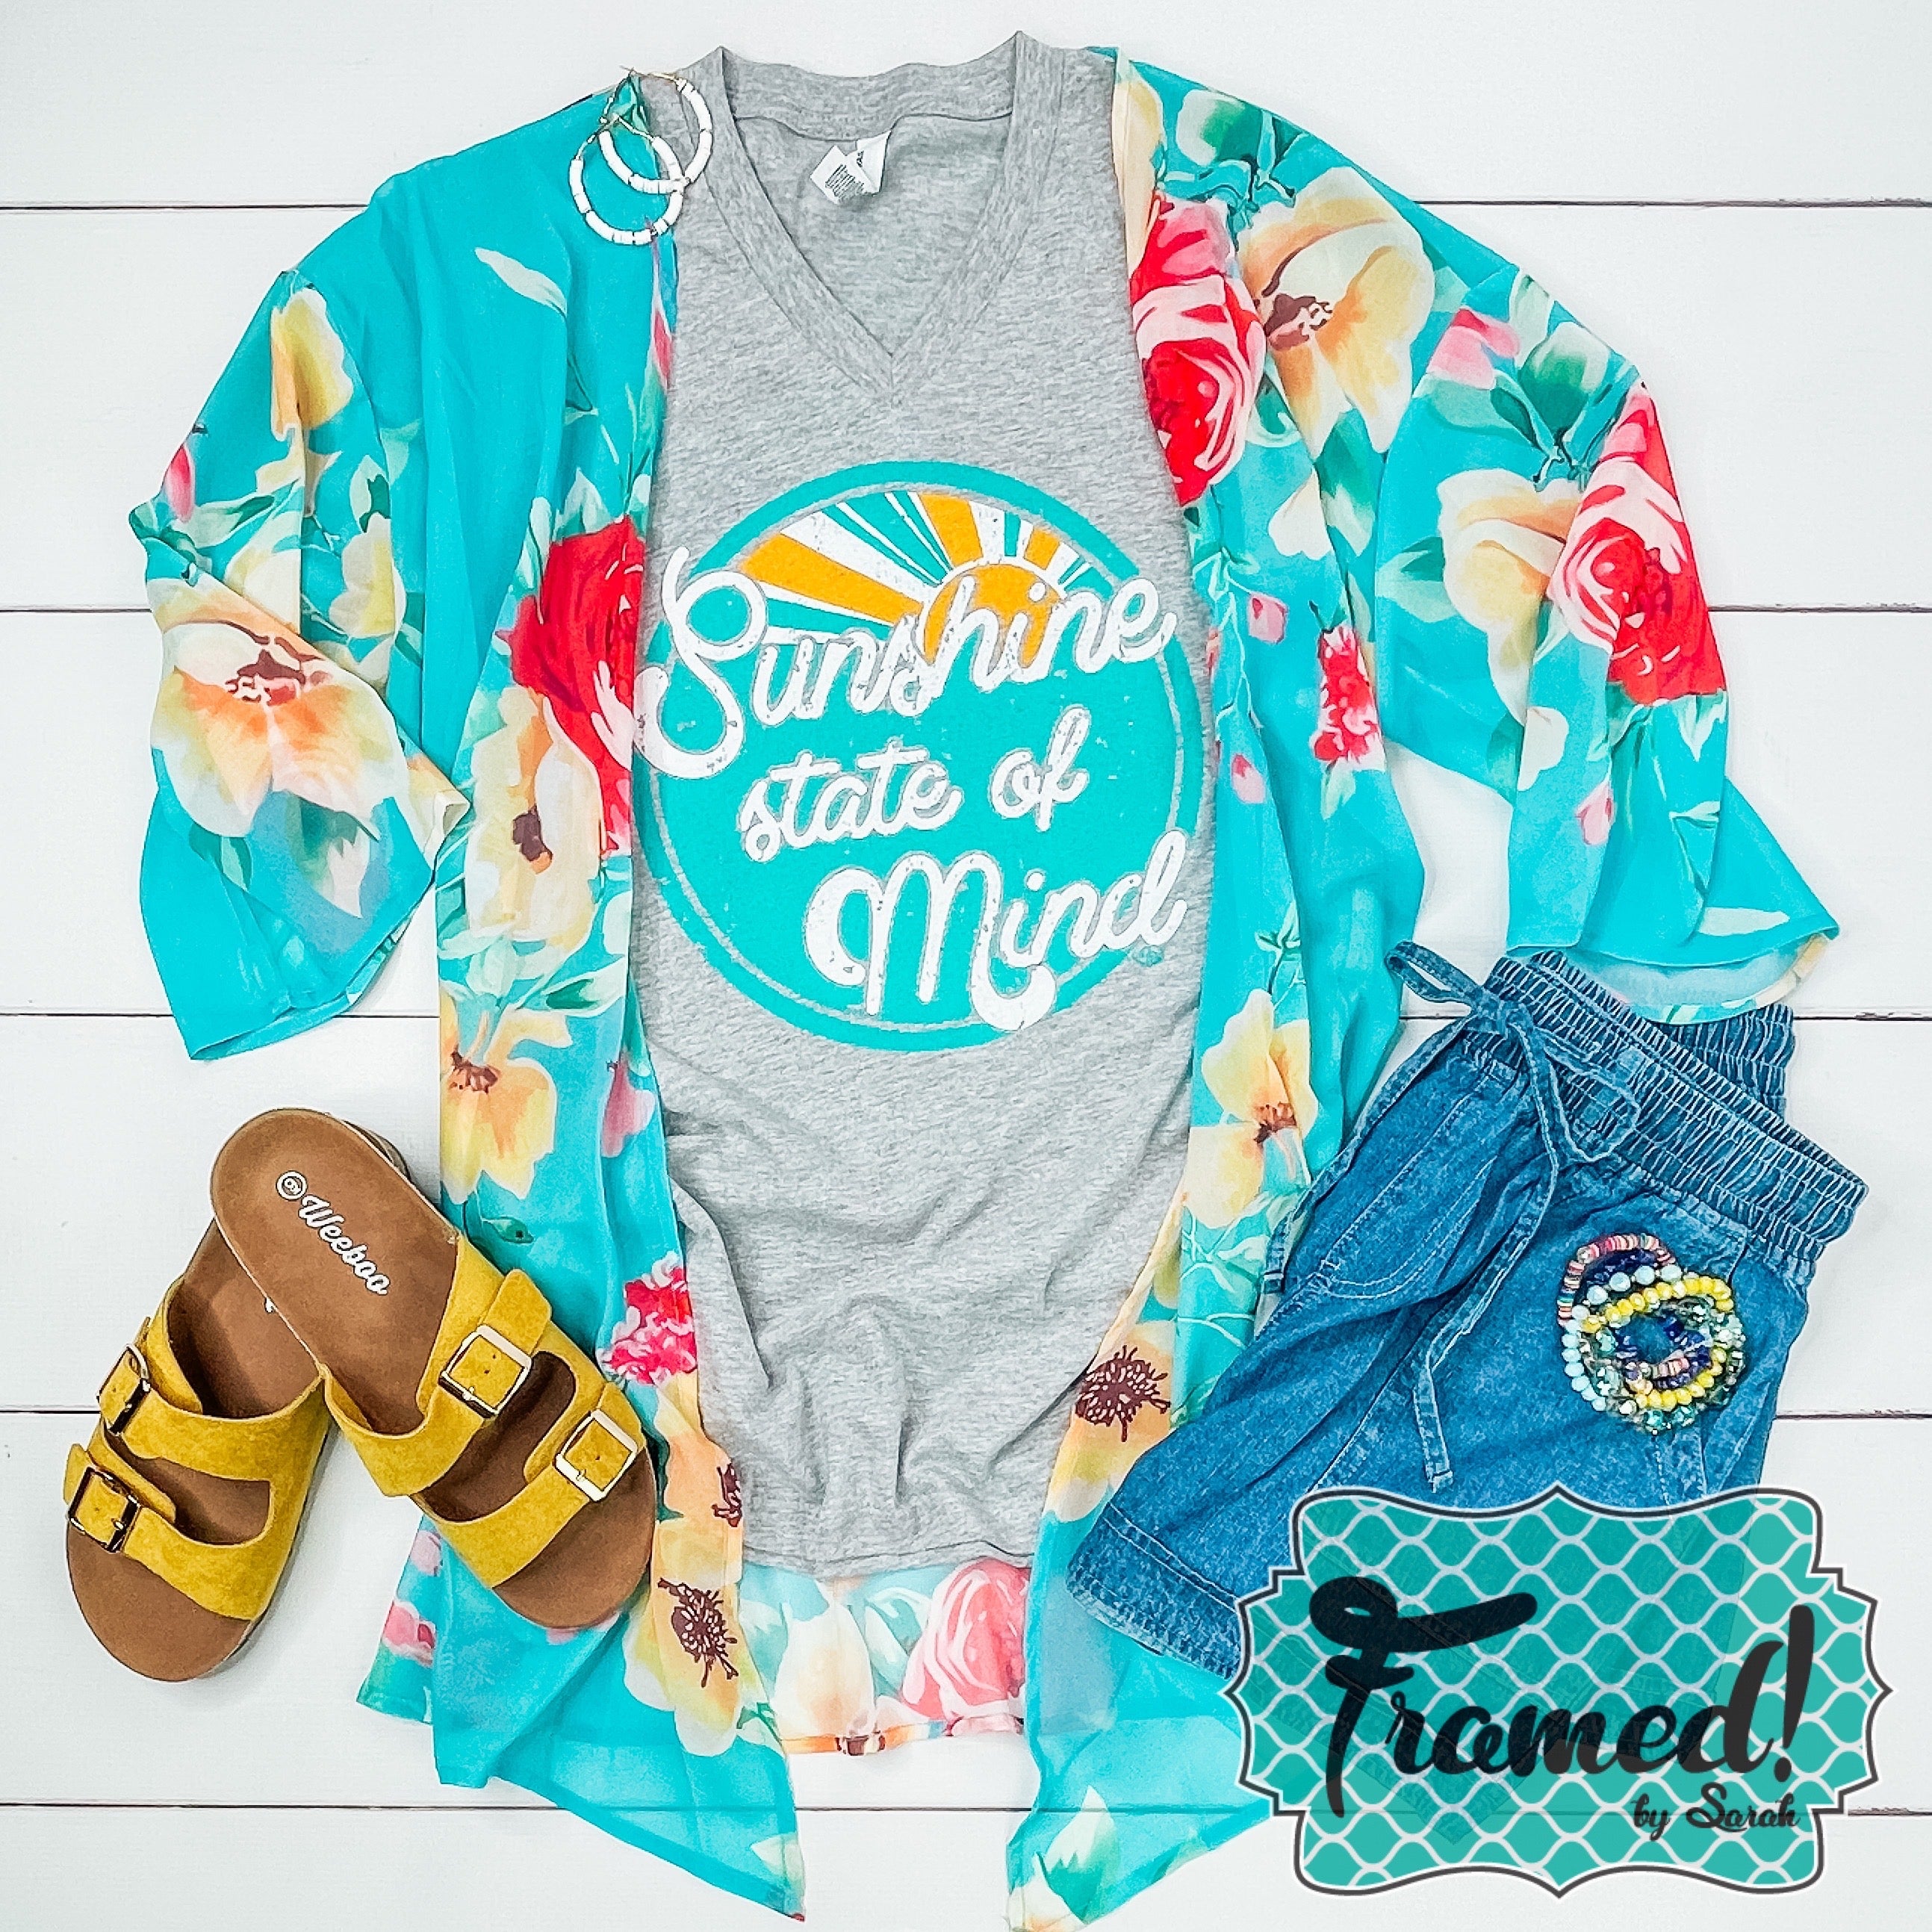 Sunshine State of Mind Tee (Small Only)